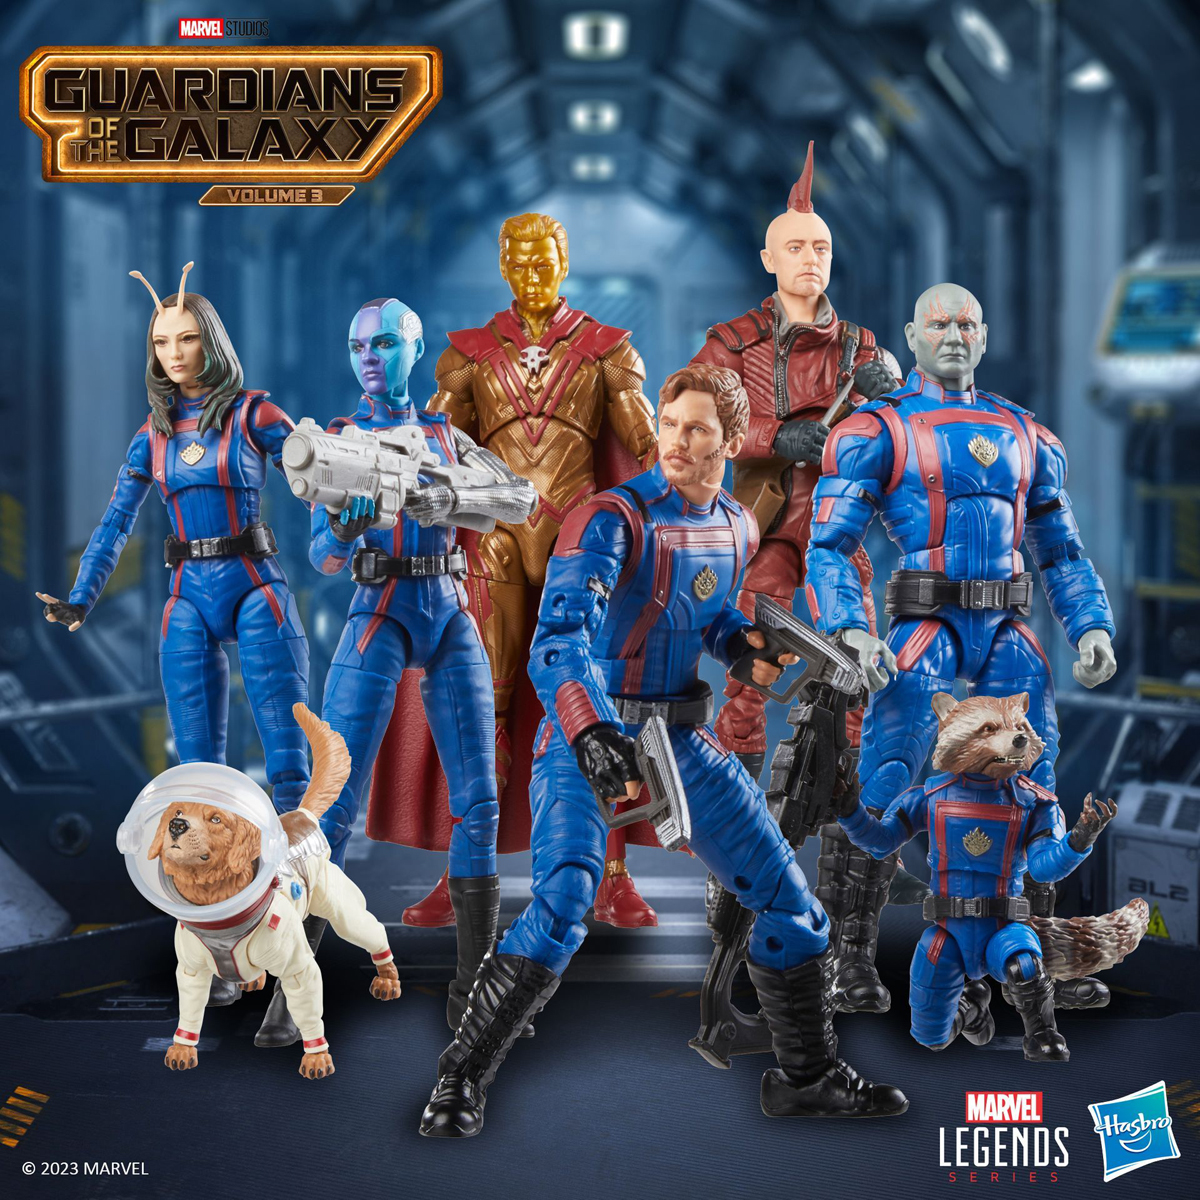 Marvel-Legends-Guaradians-of-the-Galaxy-Vol-3-Action-Figures